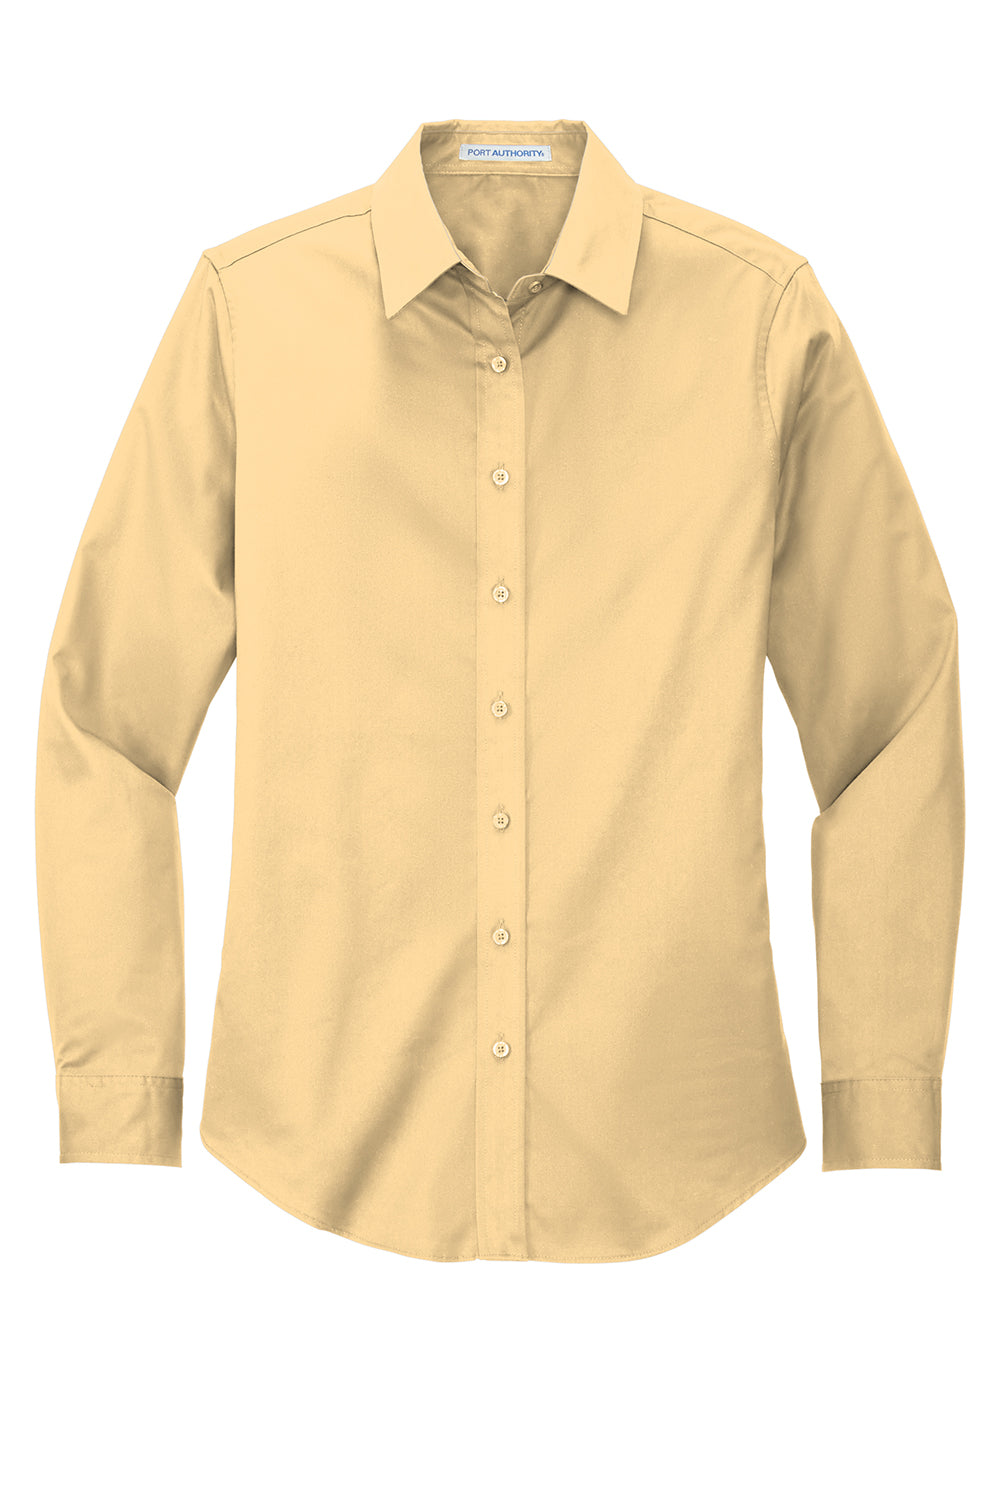 Port Authority L608 Womens Easy Care Wrinkle Resistant Long Sleeve Button Down Shirt Yellow Flat Front